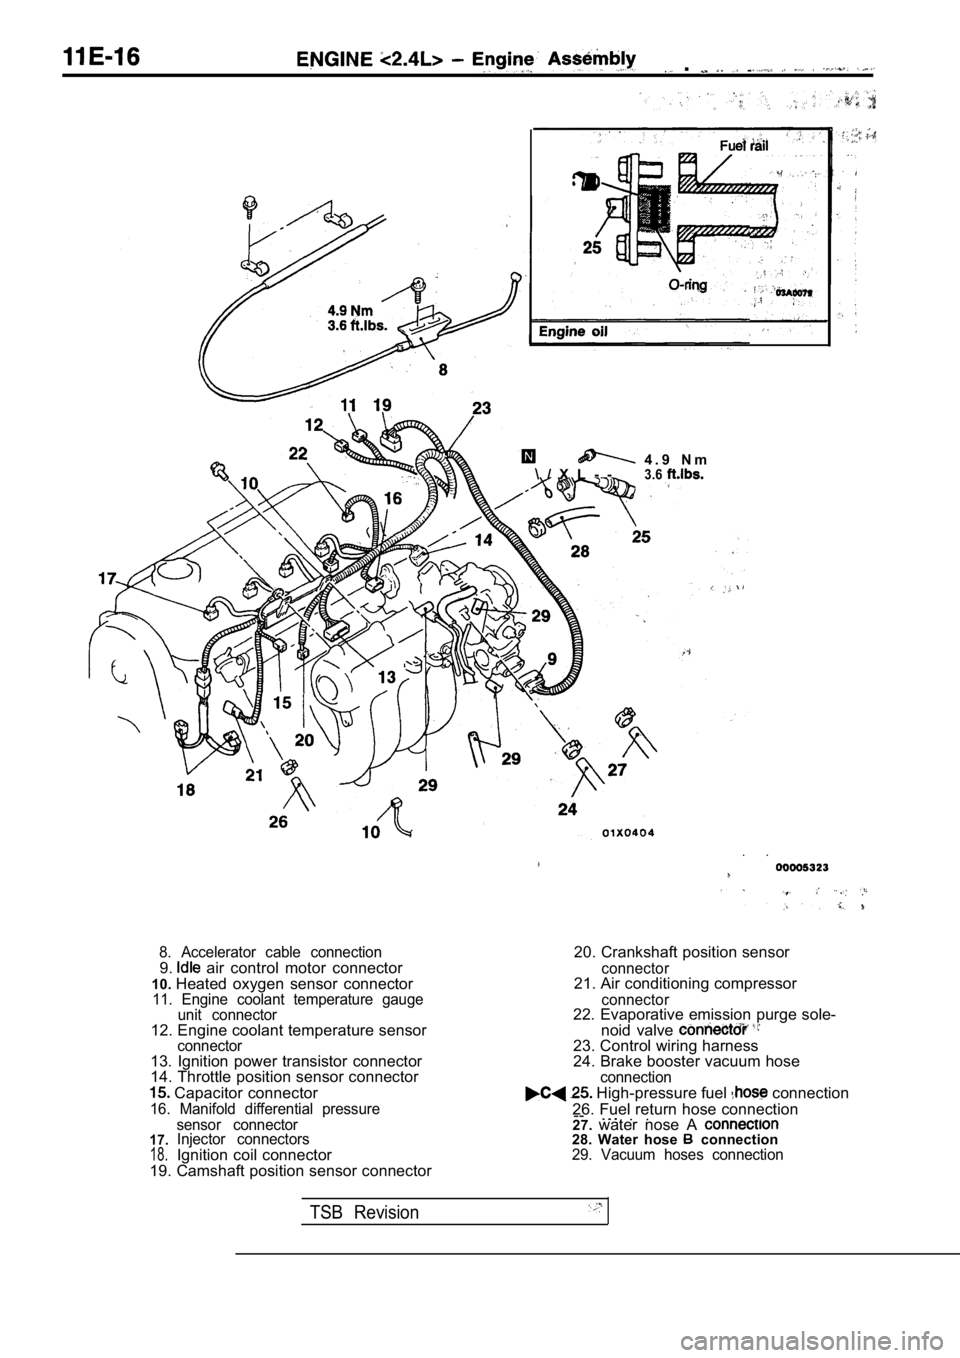 MITSUBISHI SPYDER 1990  Service Repair Manual   . 
  4 . 9   N m
\ / X L - -3.6
. .
8.  Accelerator  cable  connection9.  air  control  motor  connector
10. Heated  oxygen  sensor  connector
11.  Engine  coolant  temperature  gauge
unit  connecto